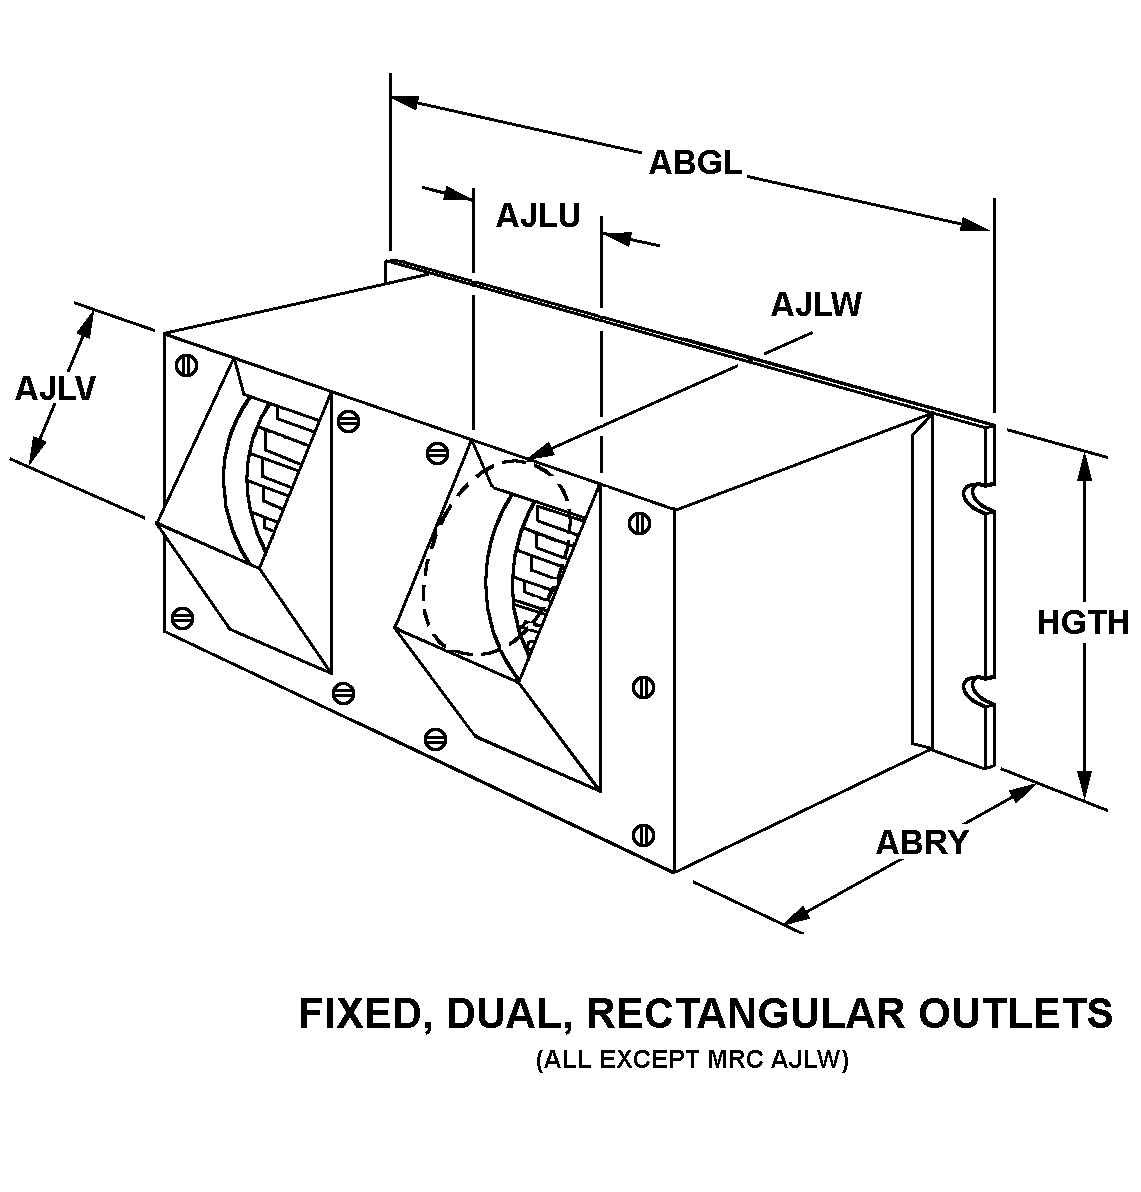 FIXED, DUAL, RECTANGULAR OUTLETS style nsn 4140-01-024-5578